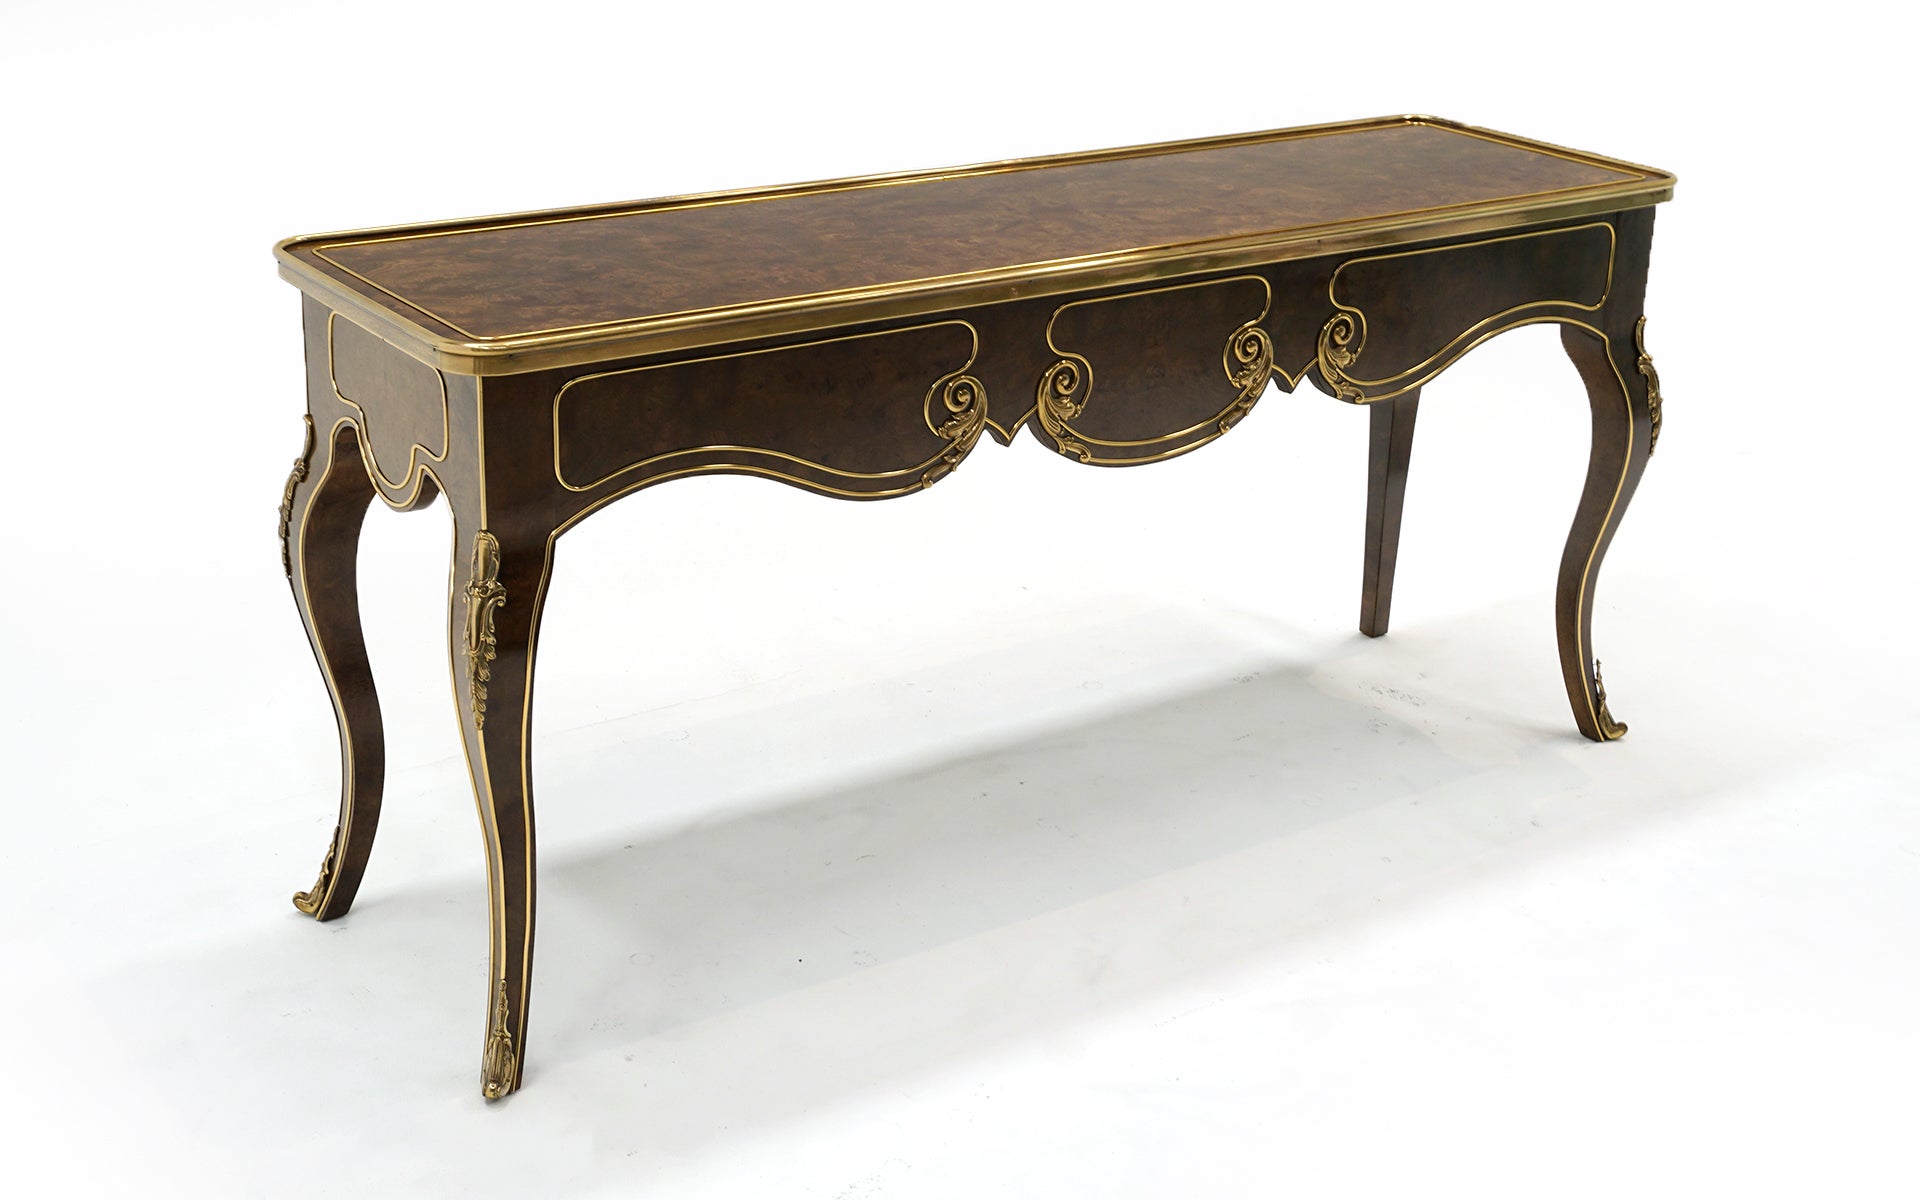 Beautiful Hollywood Regency Style console / sofa / hall table by Mastercraft.  Very good condition with few if any signs of use.  Very striking in person in brass and burl wood.  Original snd ready to use.  Signed on the underside.